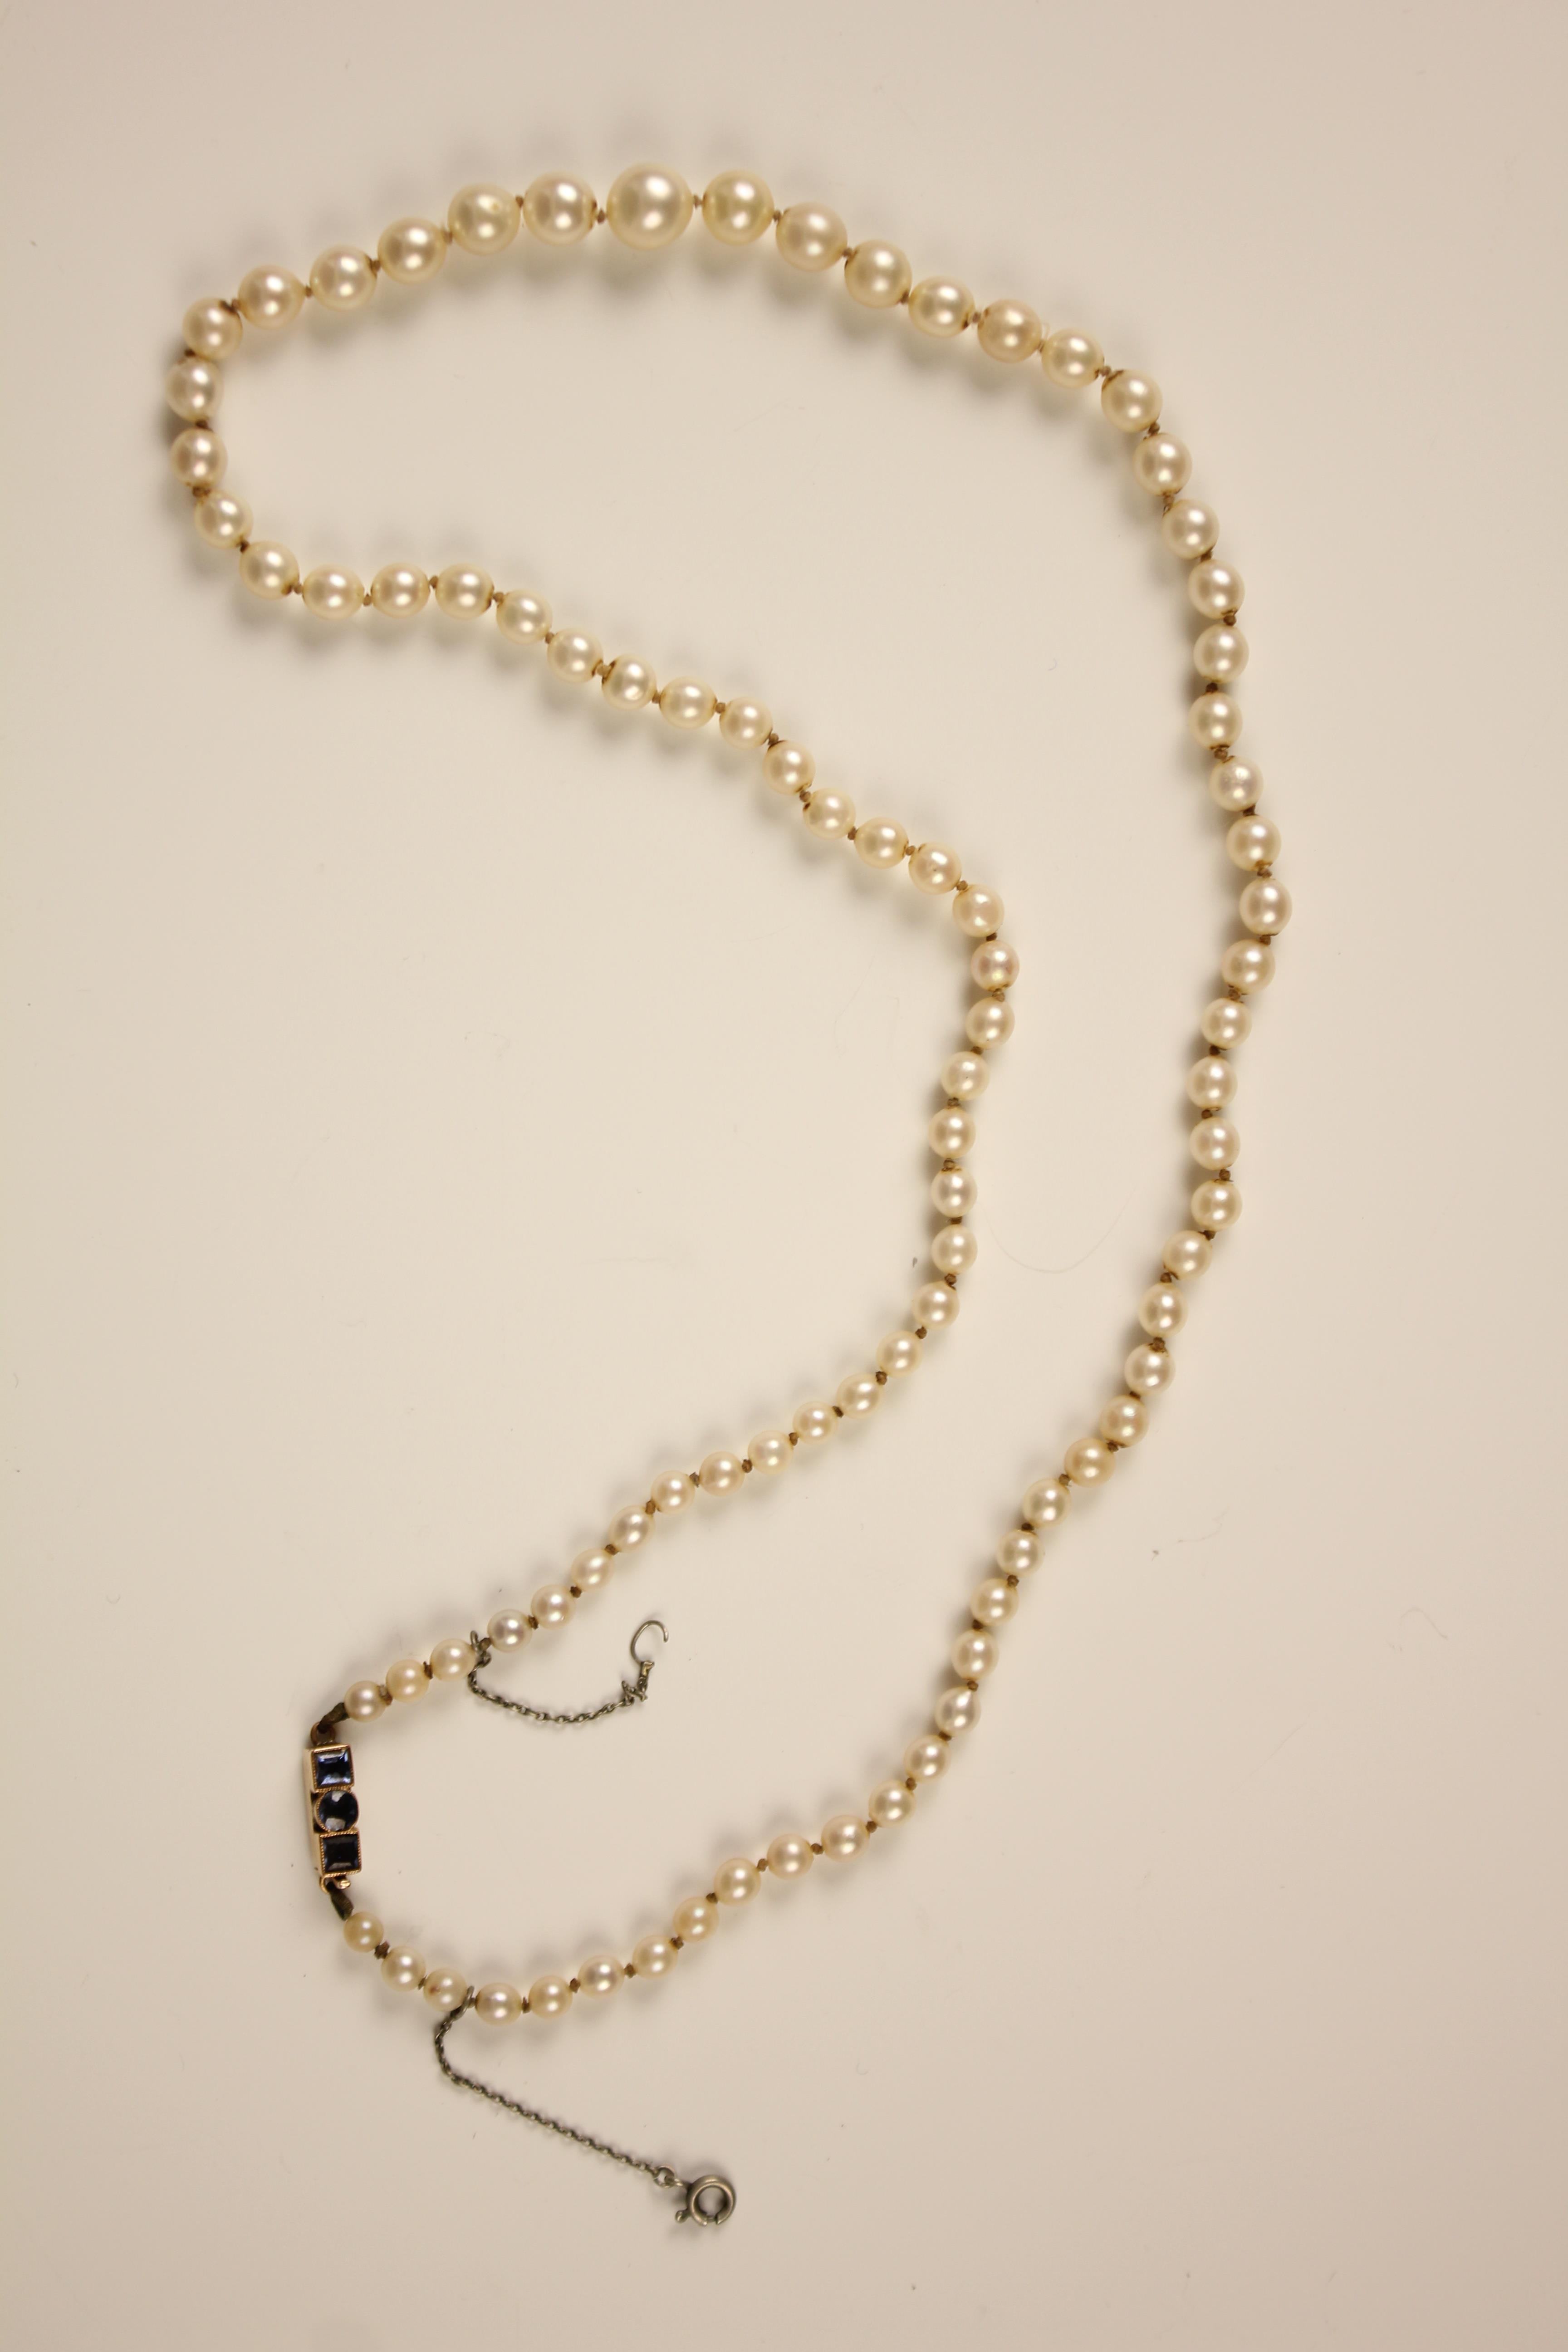 An early 20th century cultured pearl necklace, designed as a single row of round cultured pearls, - Image 4 of 12